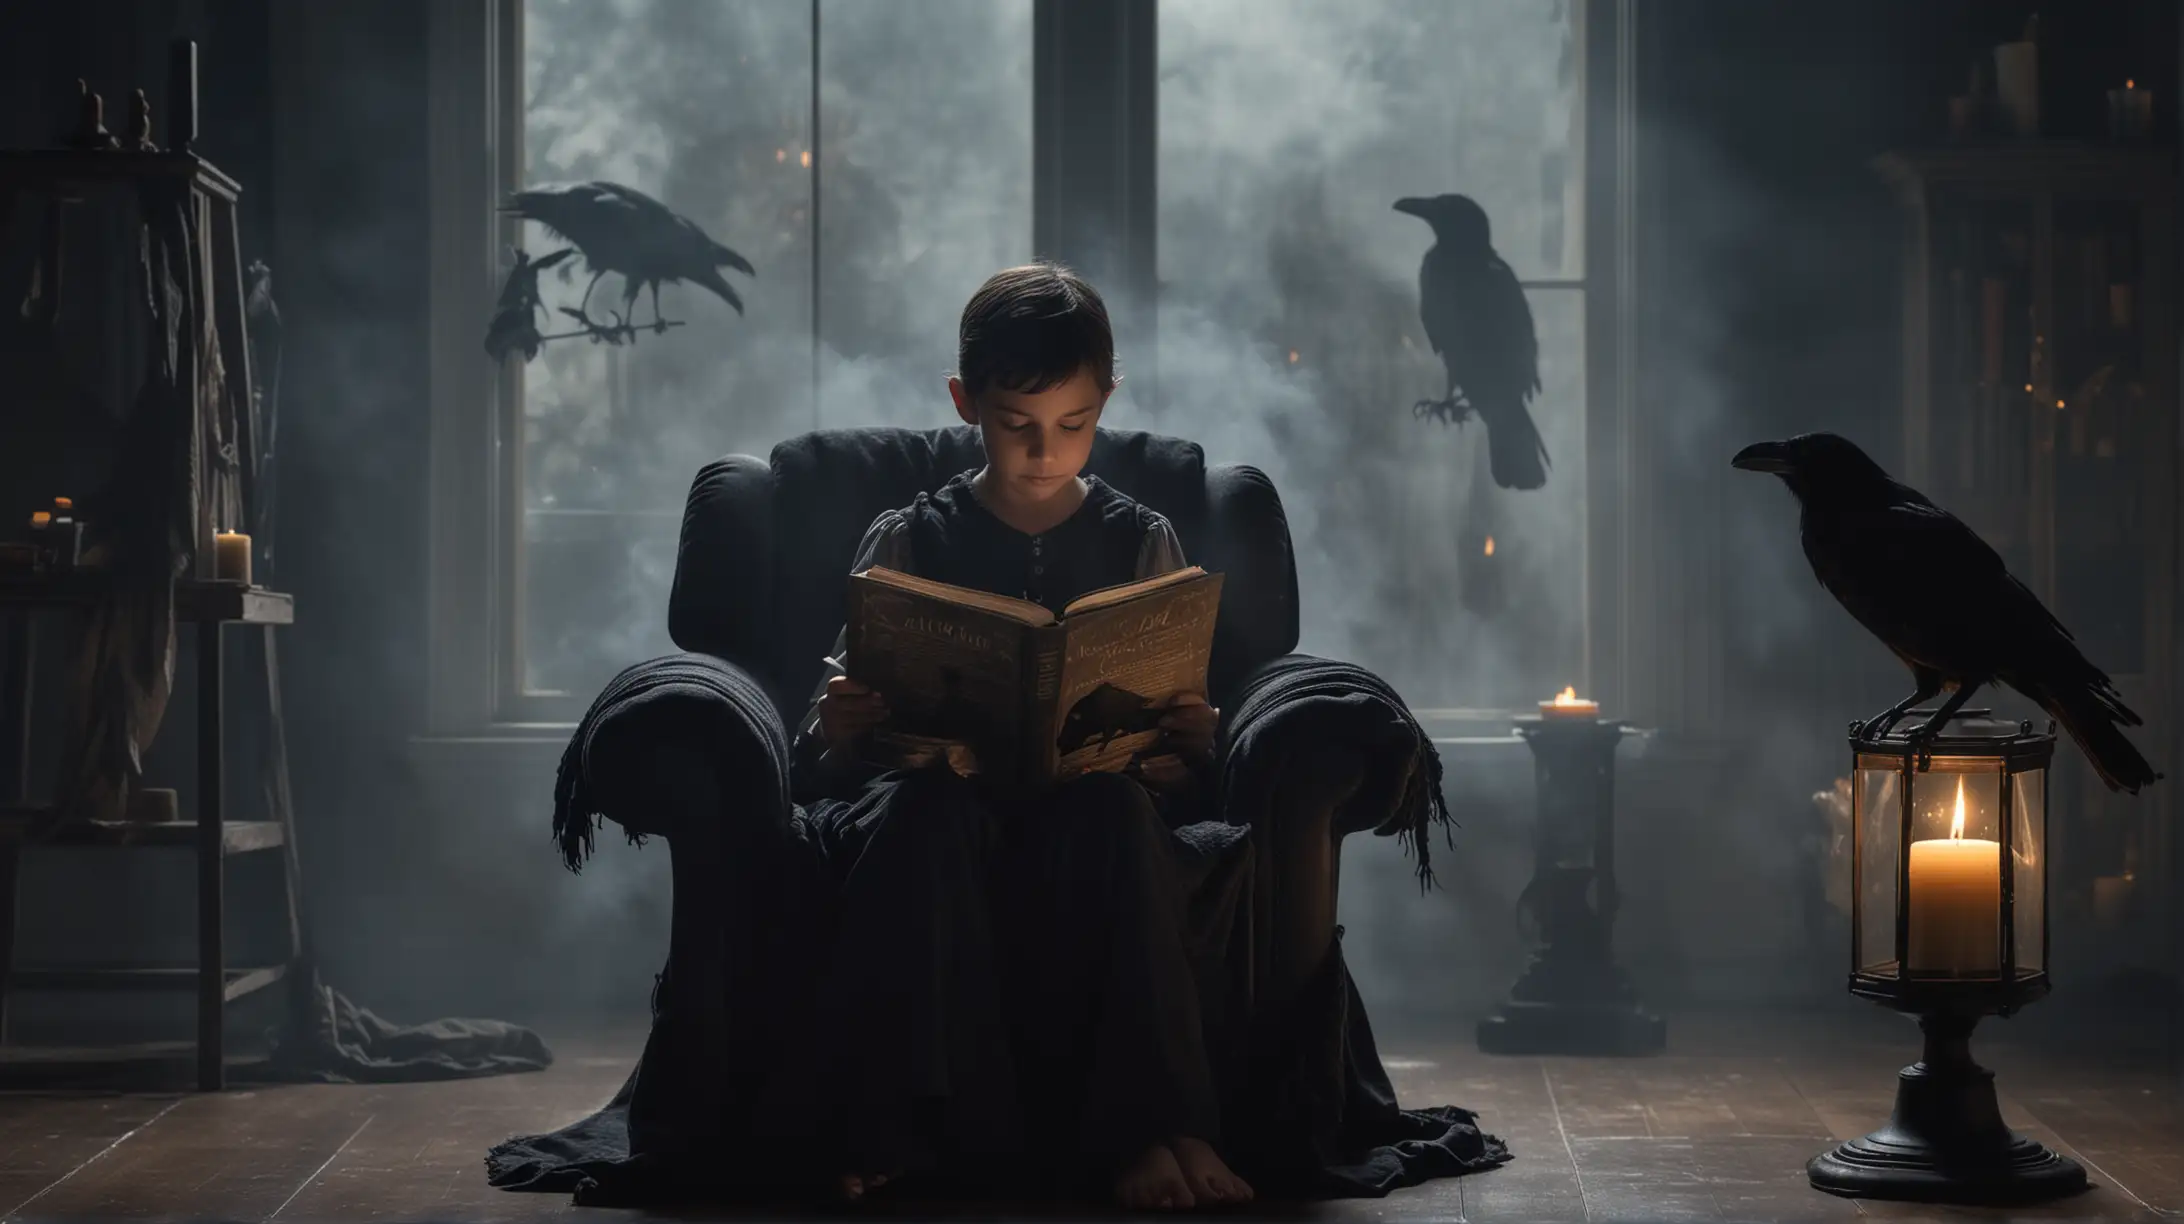 Child Reading Book with Raven Cover in Candlelit Room